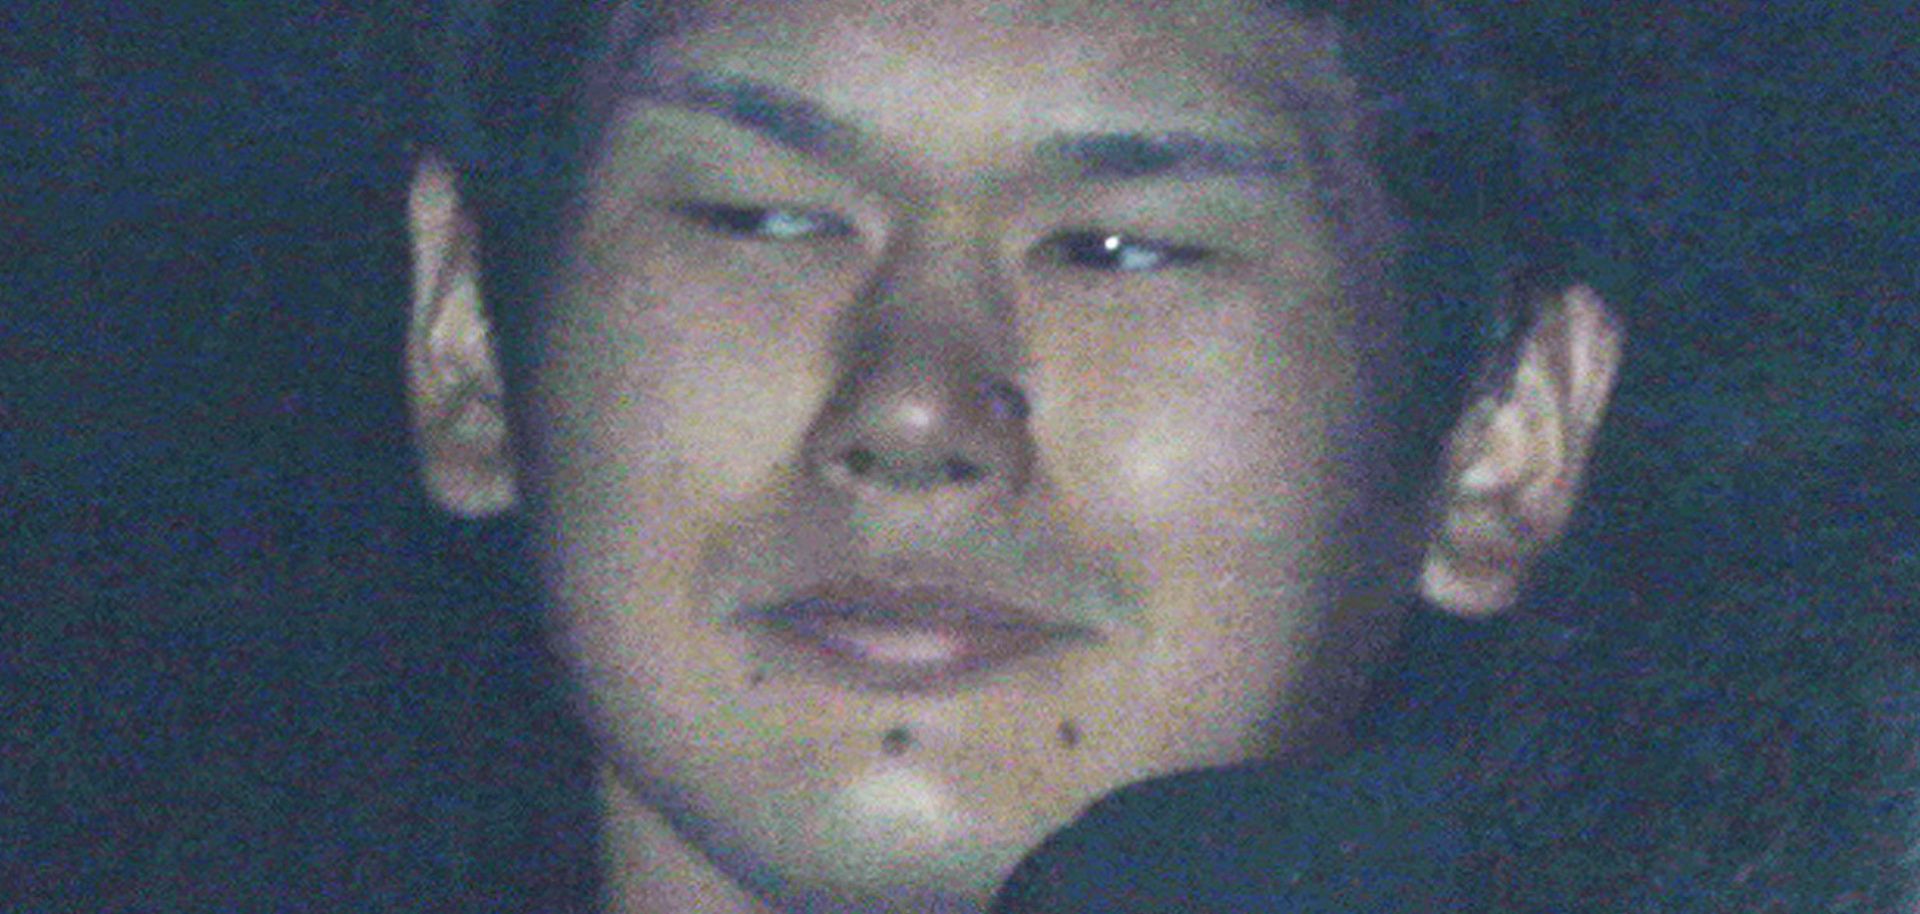 Tomohiro Iwazaki, 27, in Tokyo on May 23, 2016, after being arrested for stabbing Japanese pop star Mayu Tomita, whom he had allegedly stalked.